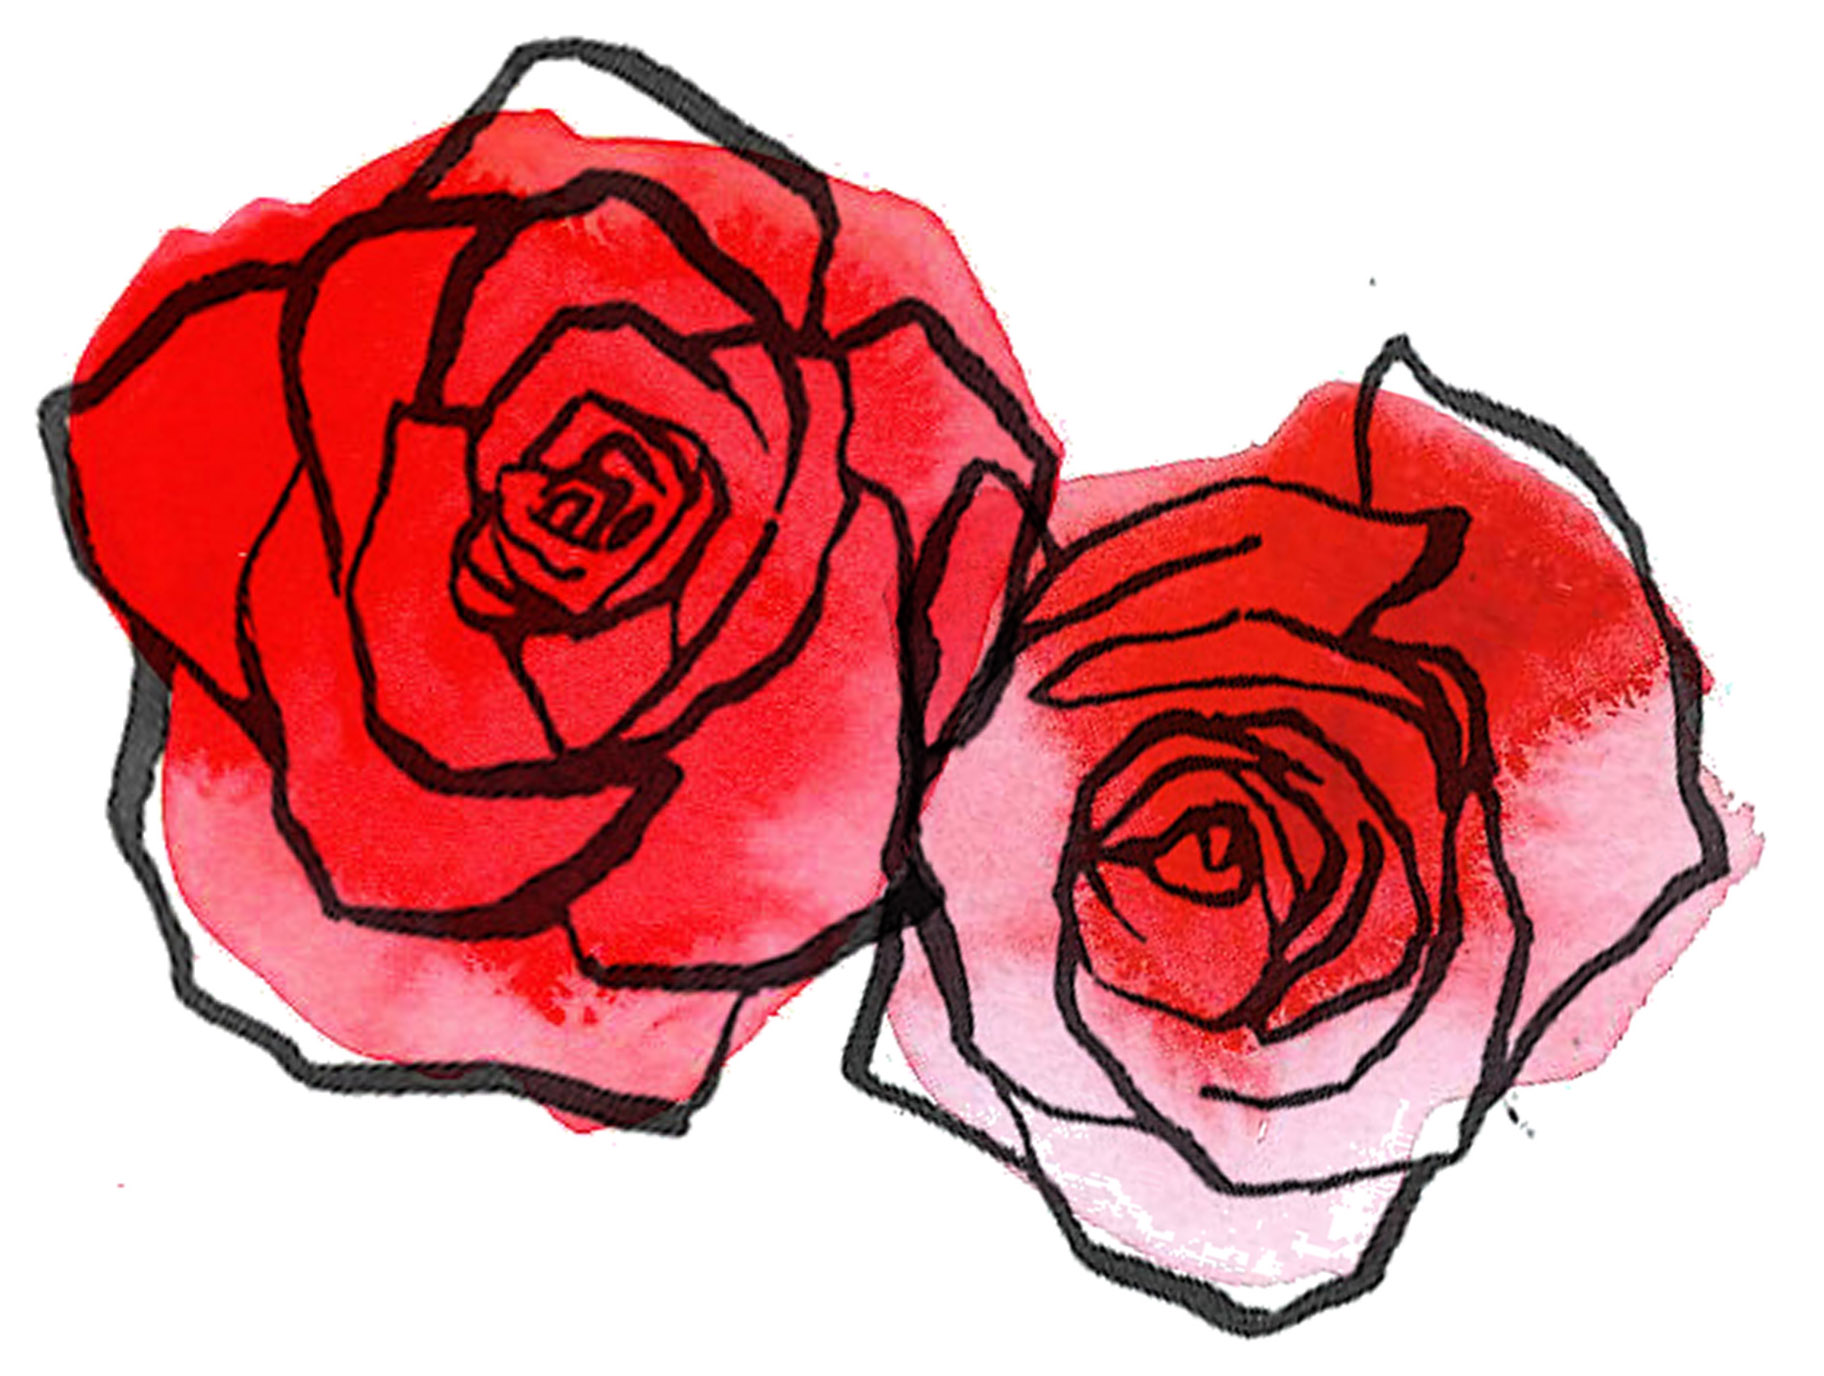 Red Rose Drawing | DrawingSomeone.com